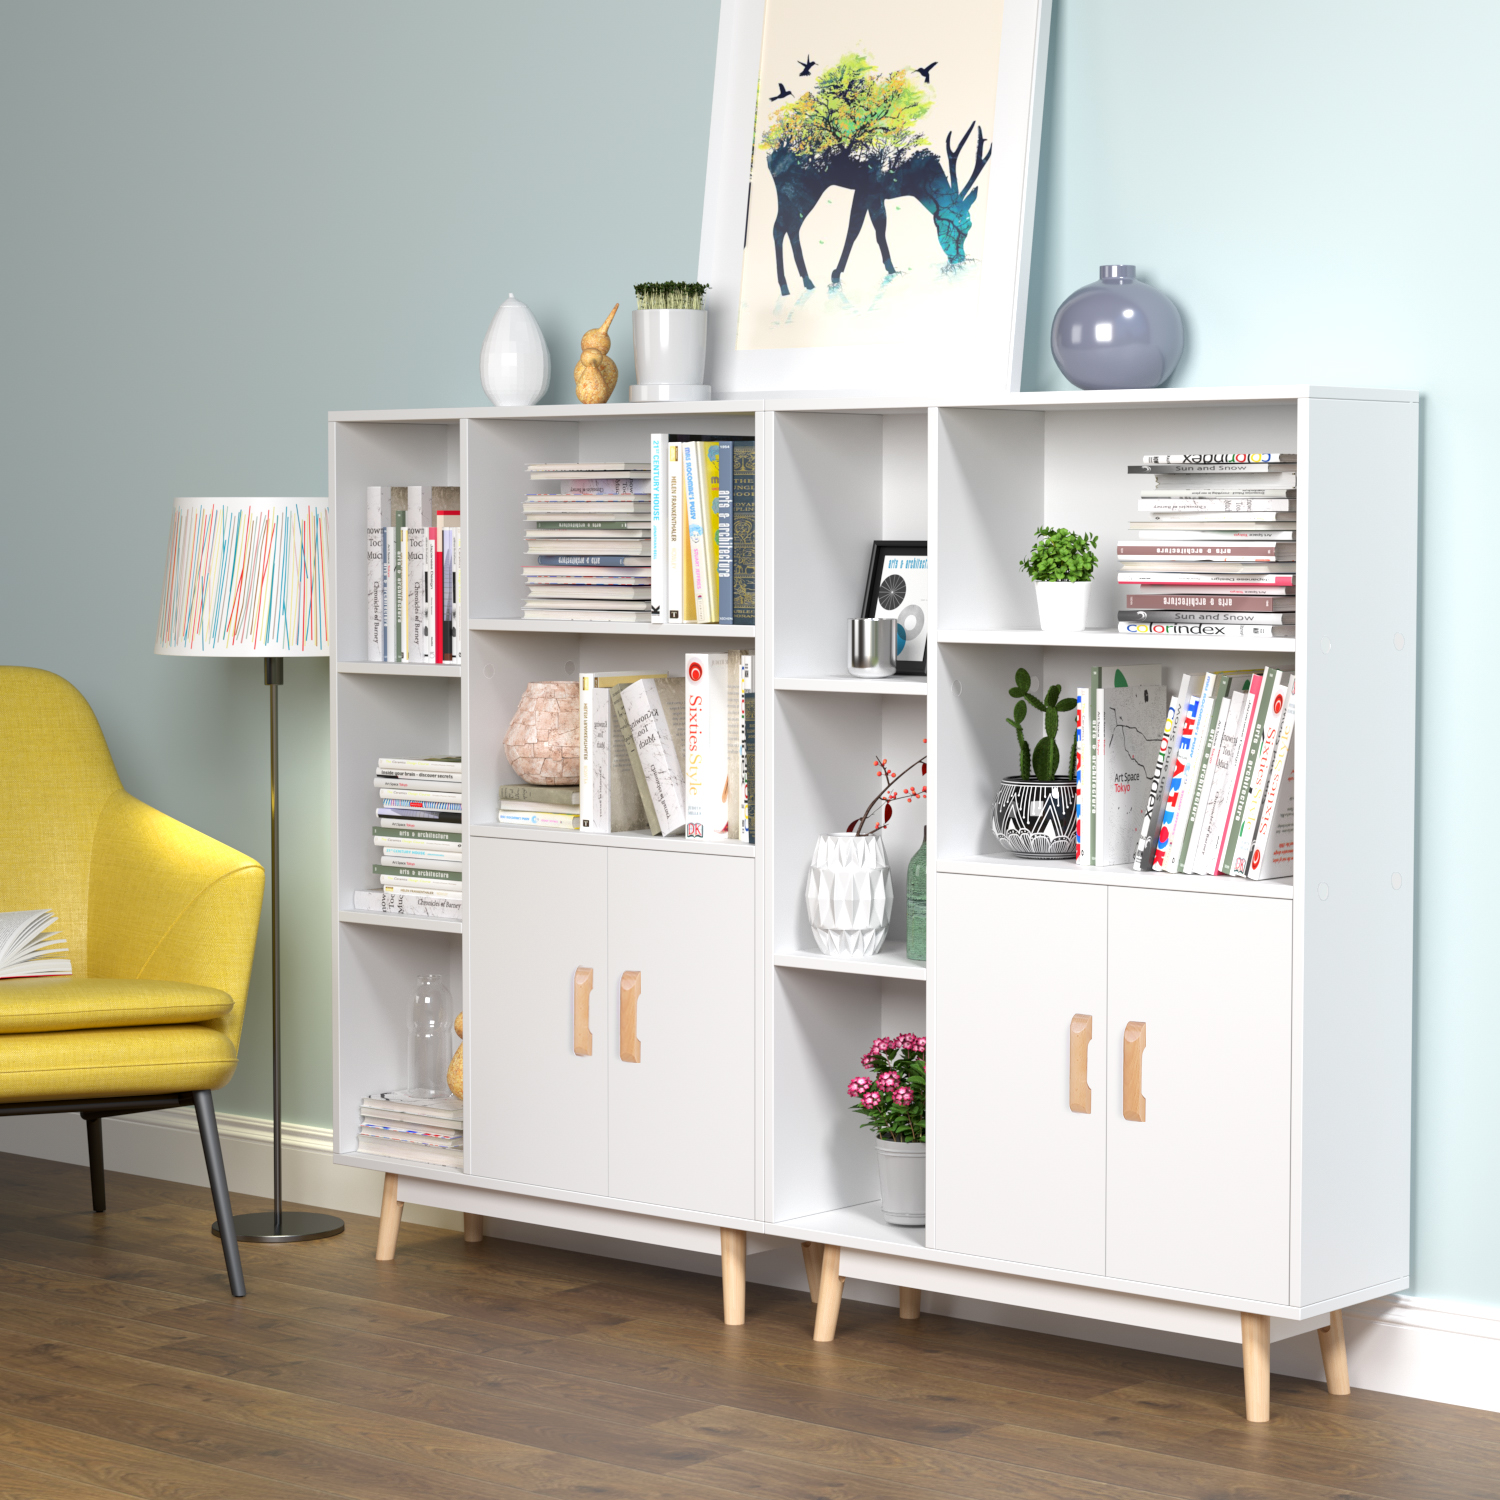 Homfa 5 Cube Bookcase with Door, Open Shelves Free Standing Storage Cabinet with Solid Legs, White Finish - image 5 of 12